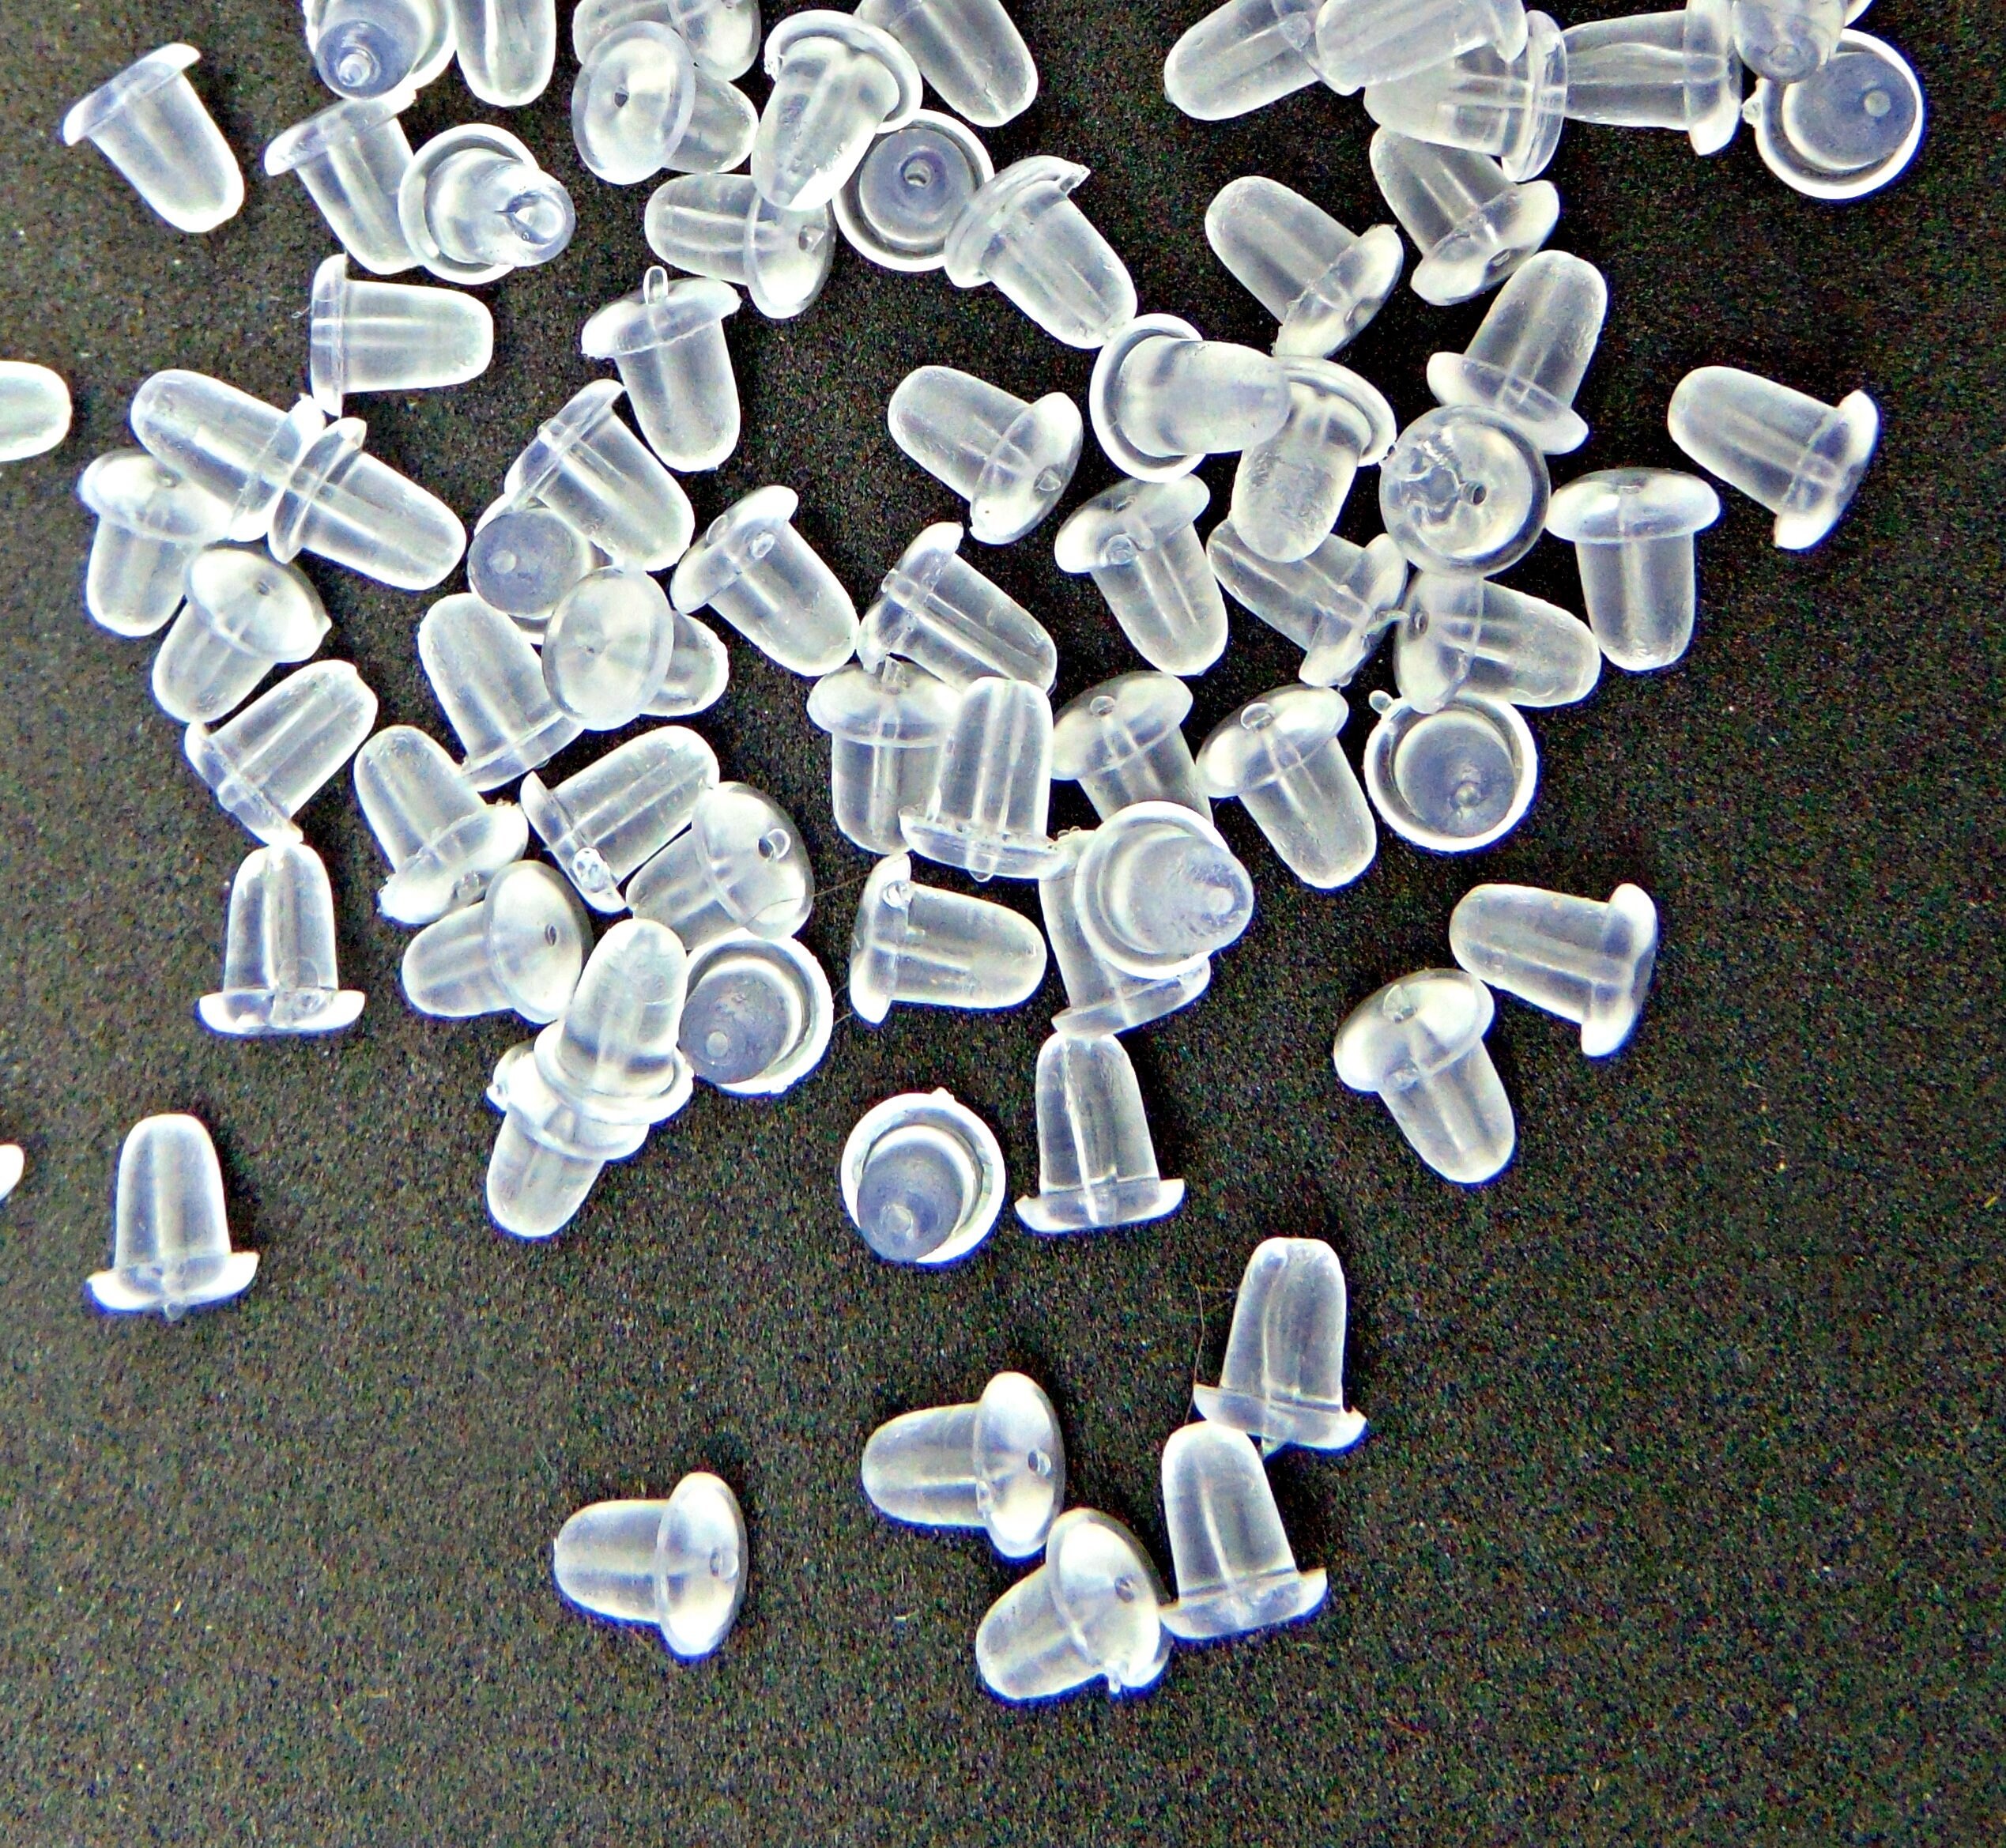 50 SOFT EASY ON PLASTIC EARNUTS RUBBER STOPPER SILICONE EARRING